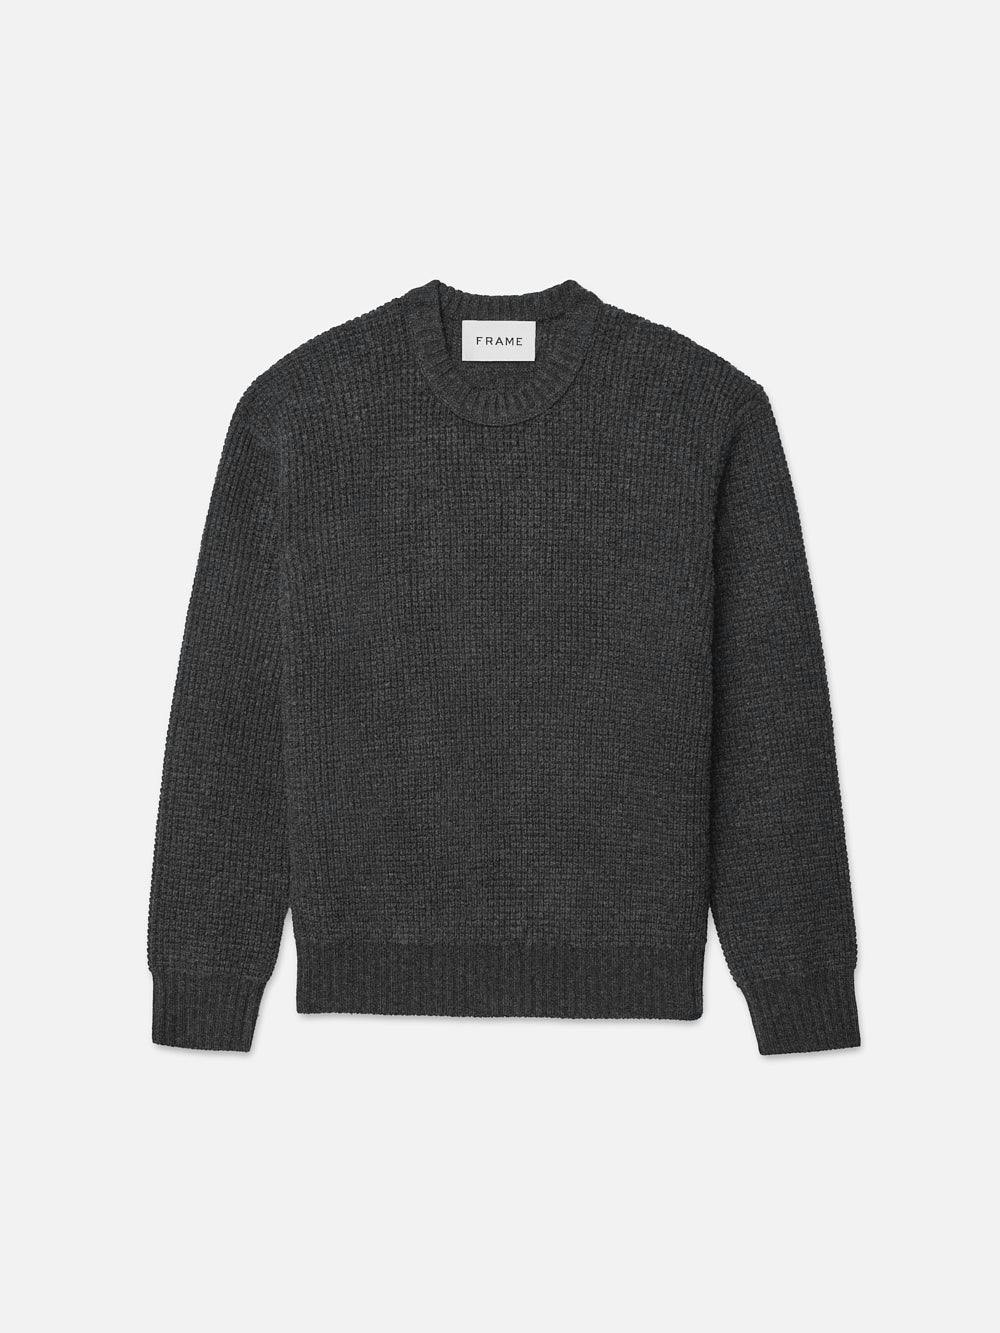 Wool Crewneck Sweater in Charcoal – FRAME